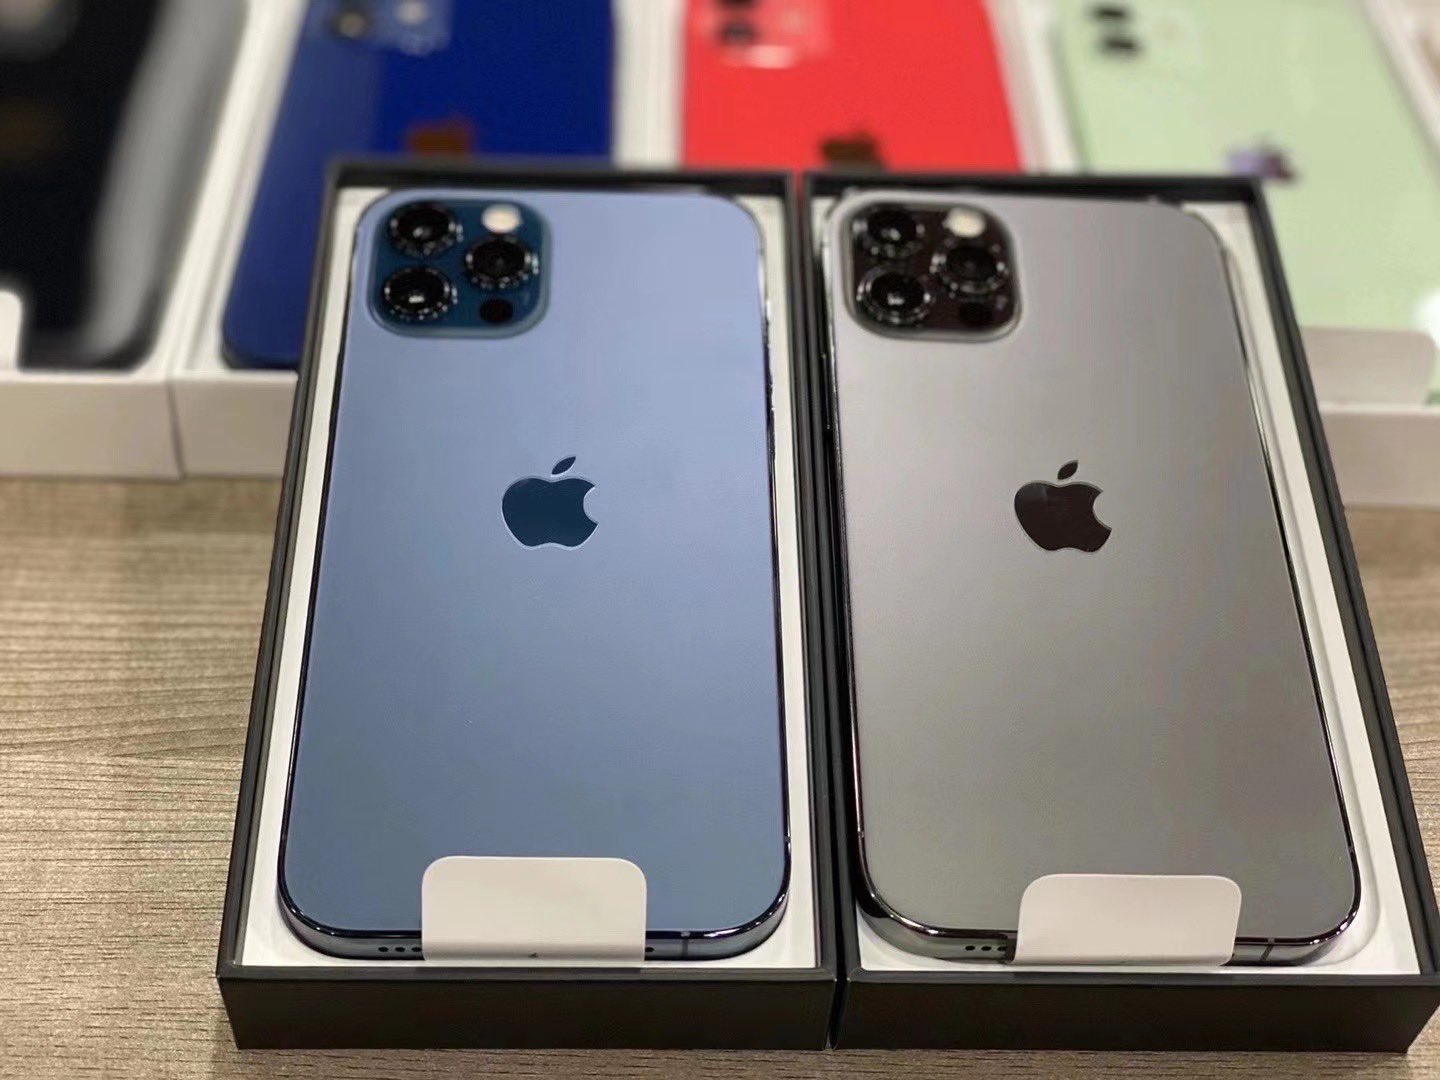 New Photos Offer Better Look At Iphone 12 Color Options Insta Market News